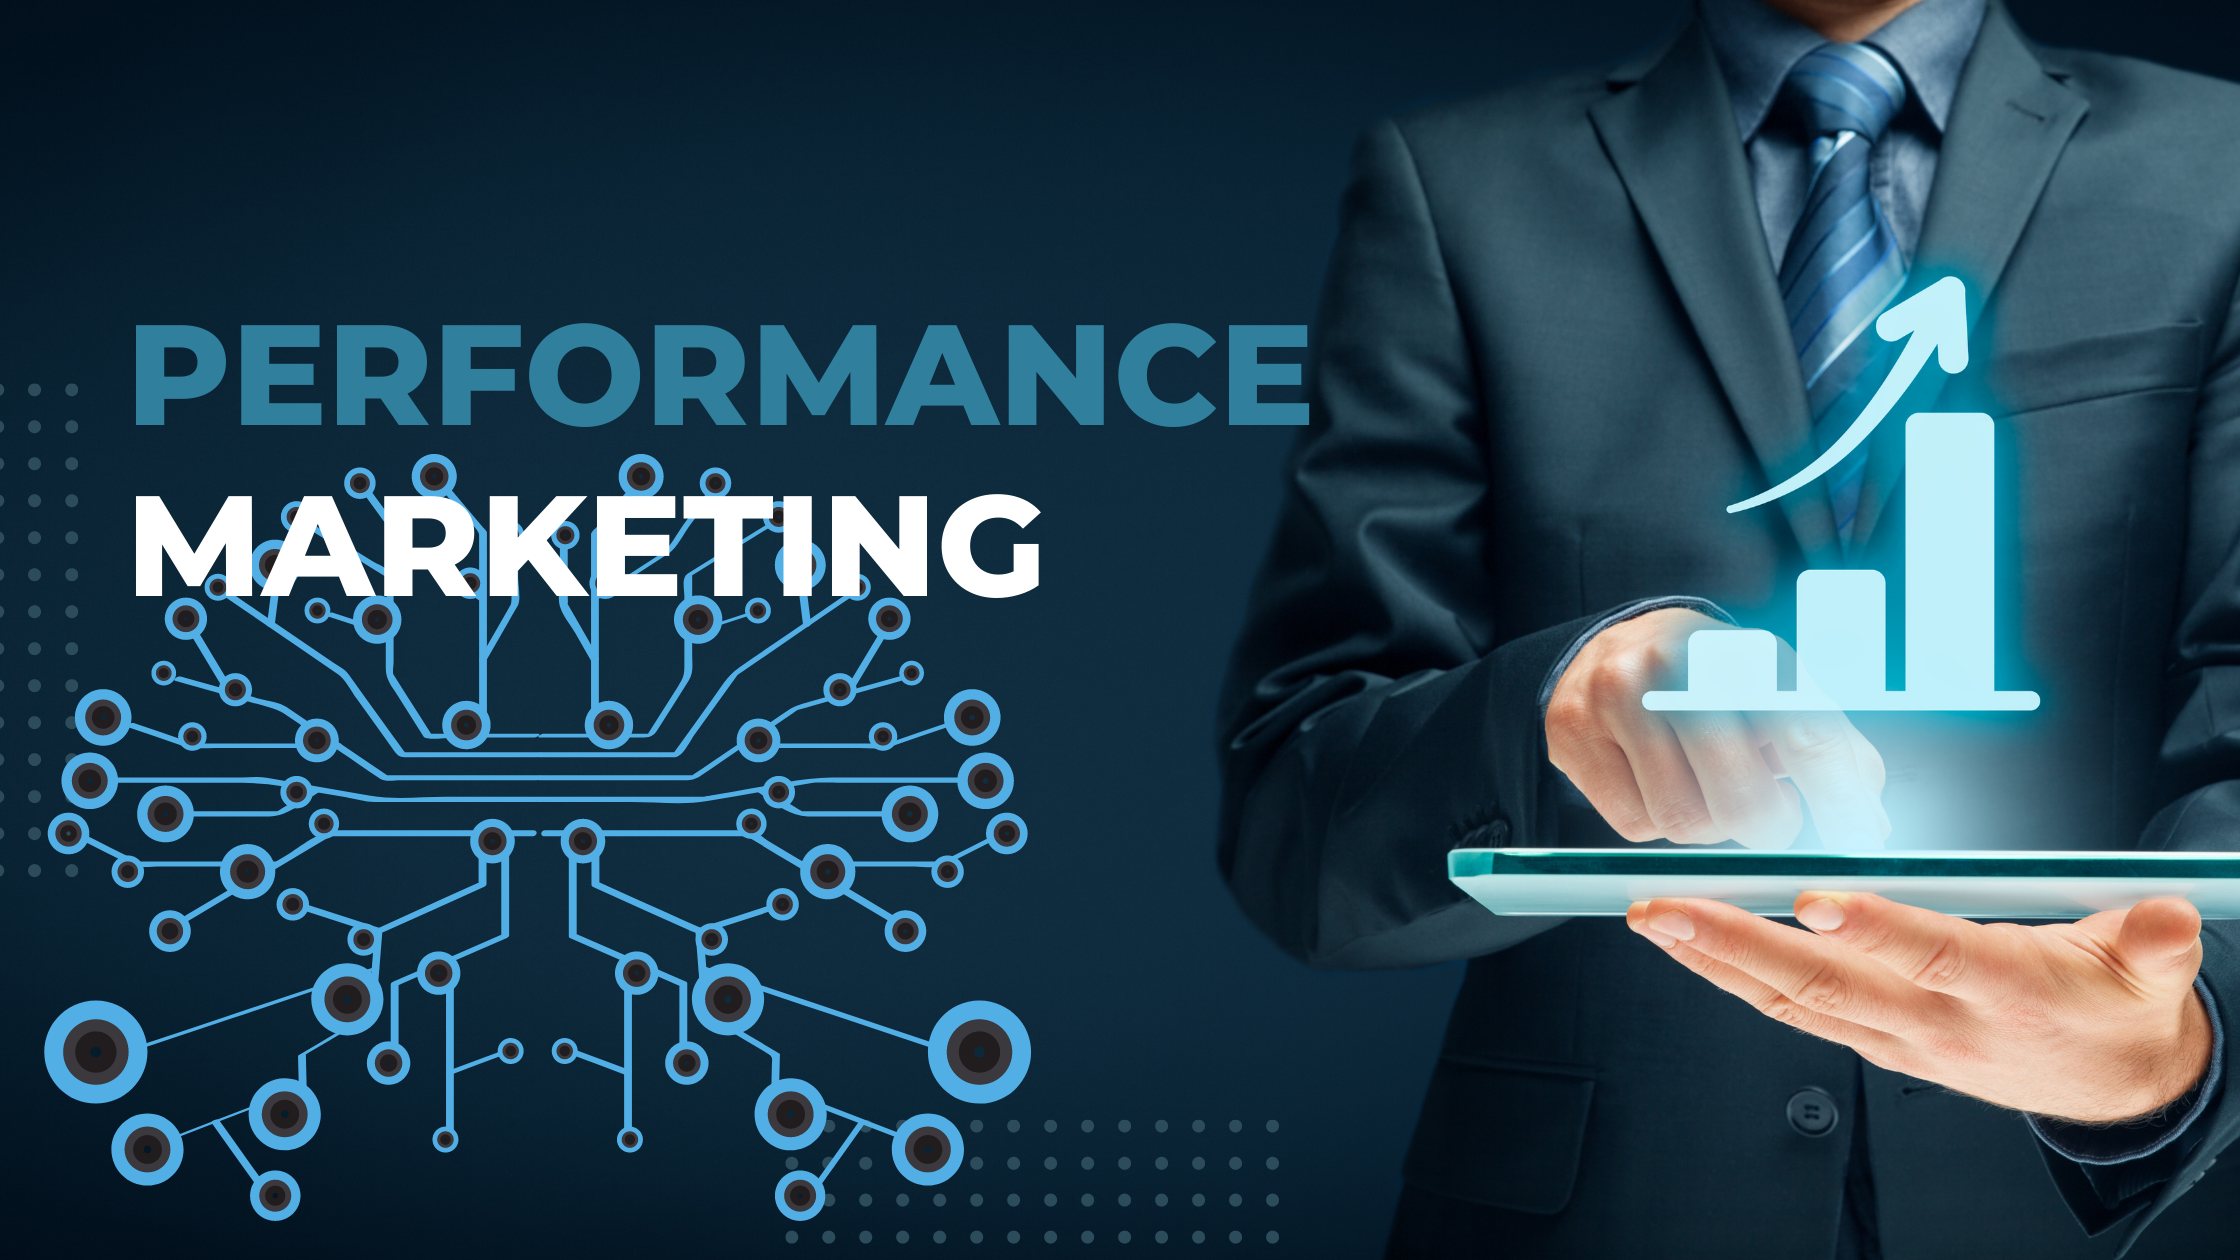 artificial intelligence and machine learning in performance marketing